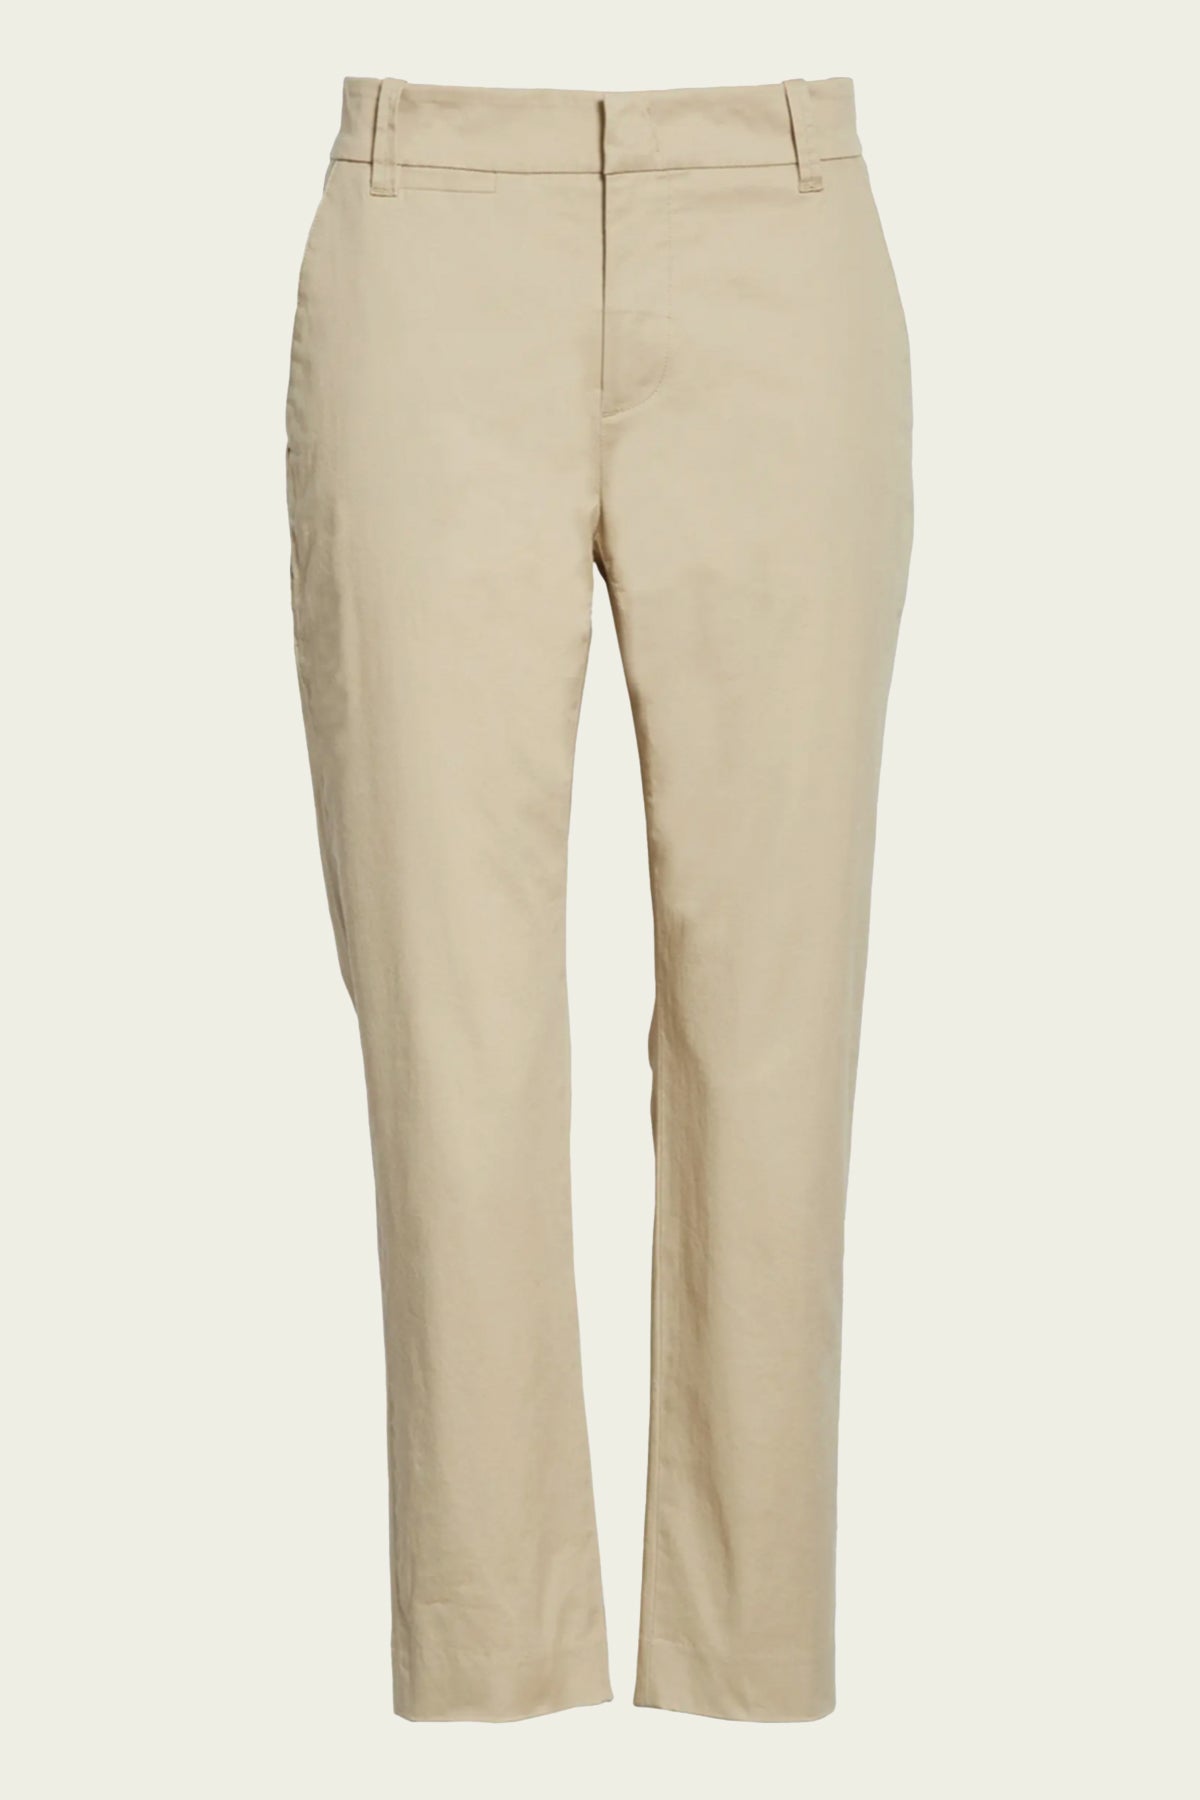 Coin Pocket Chino in Latte - shop-olivia.com